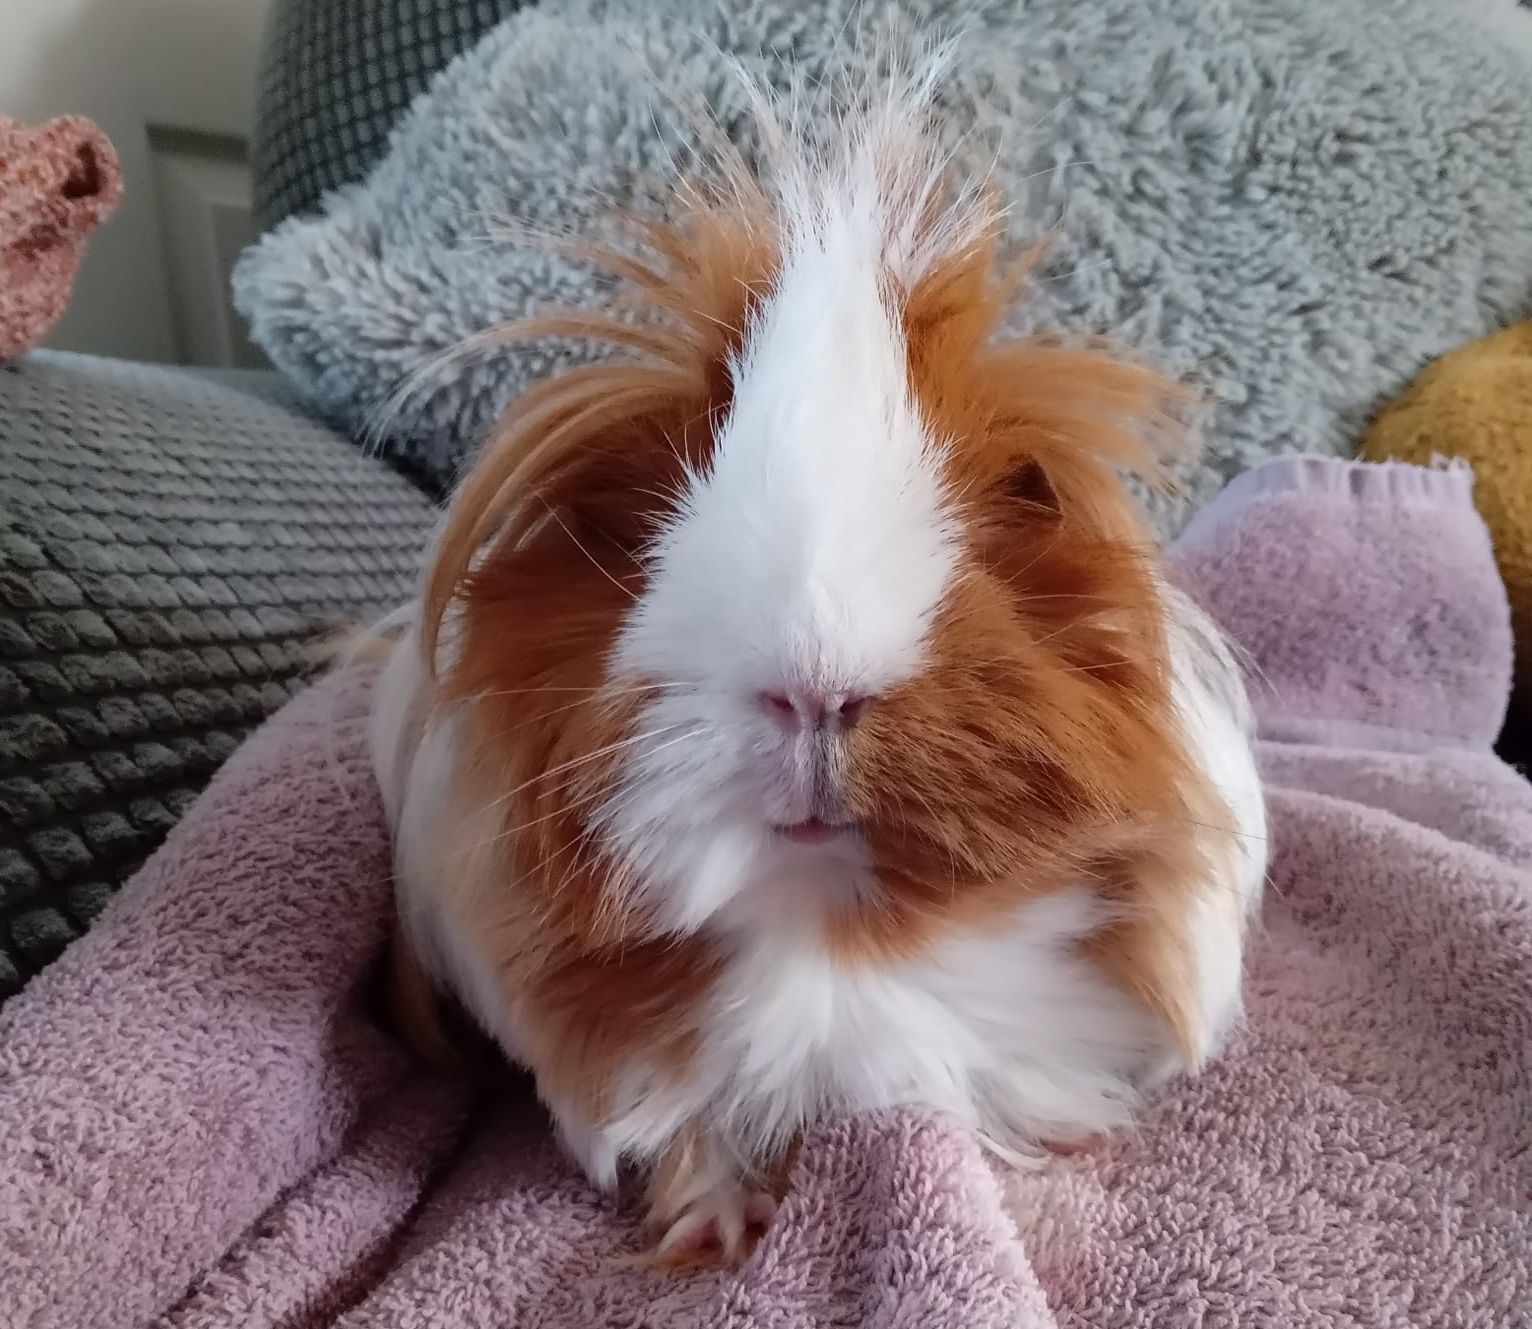 Maggie May the guinea pig